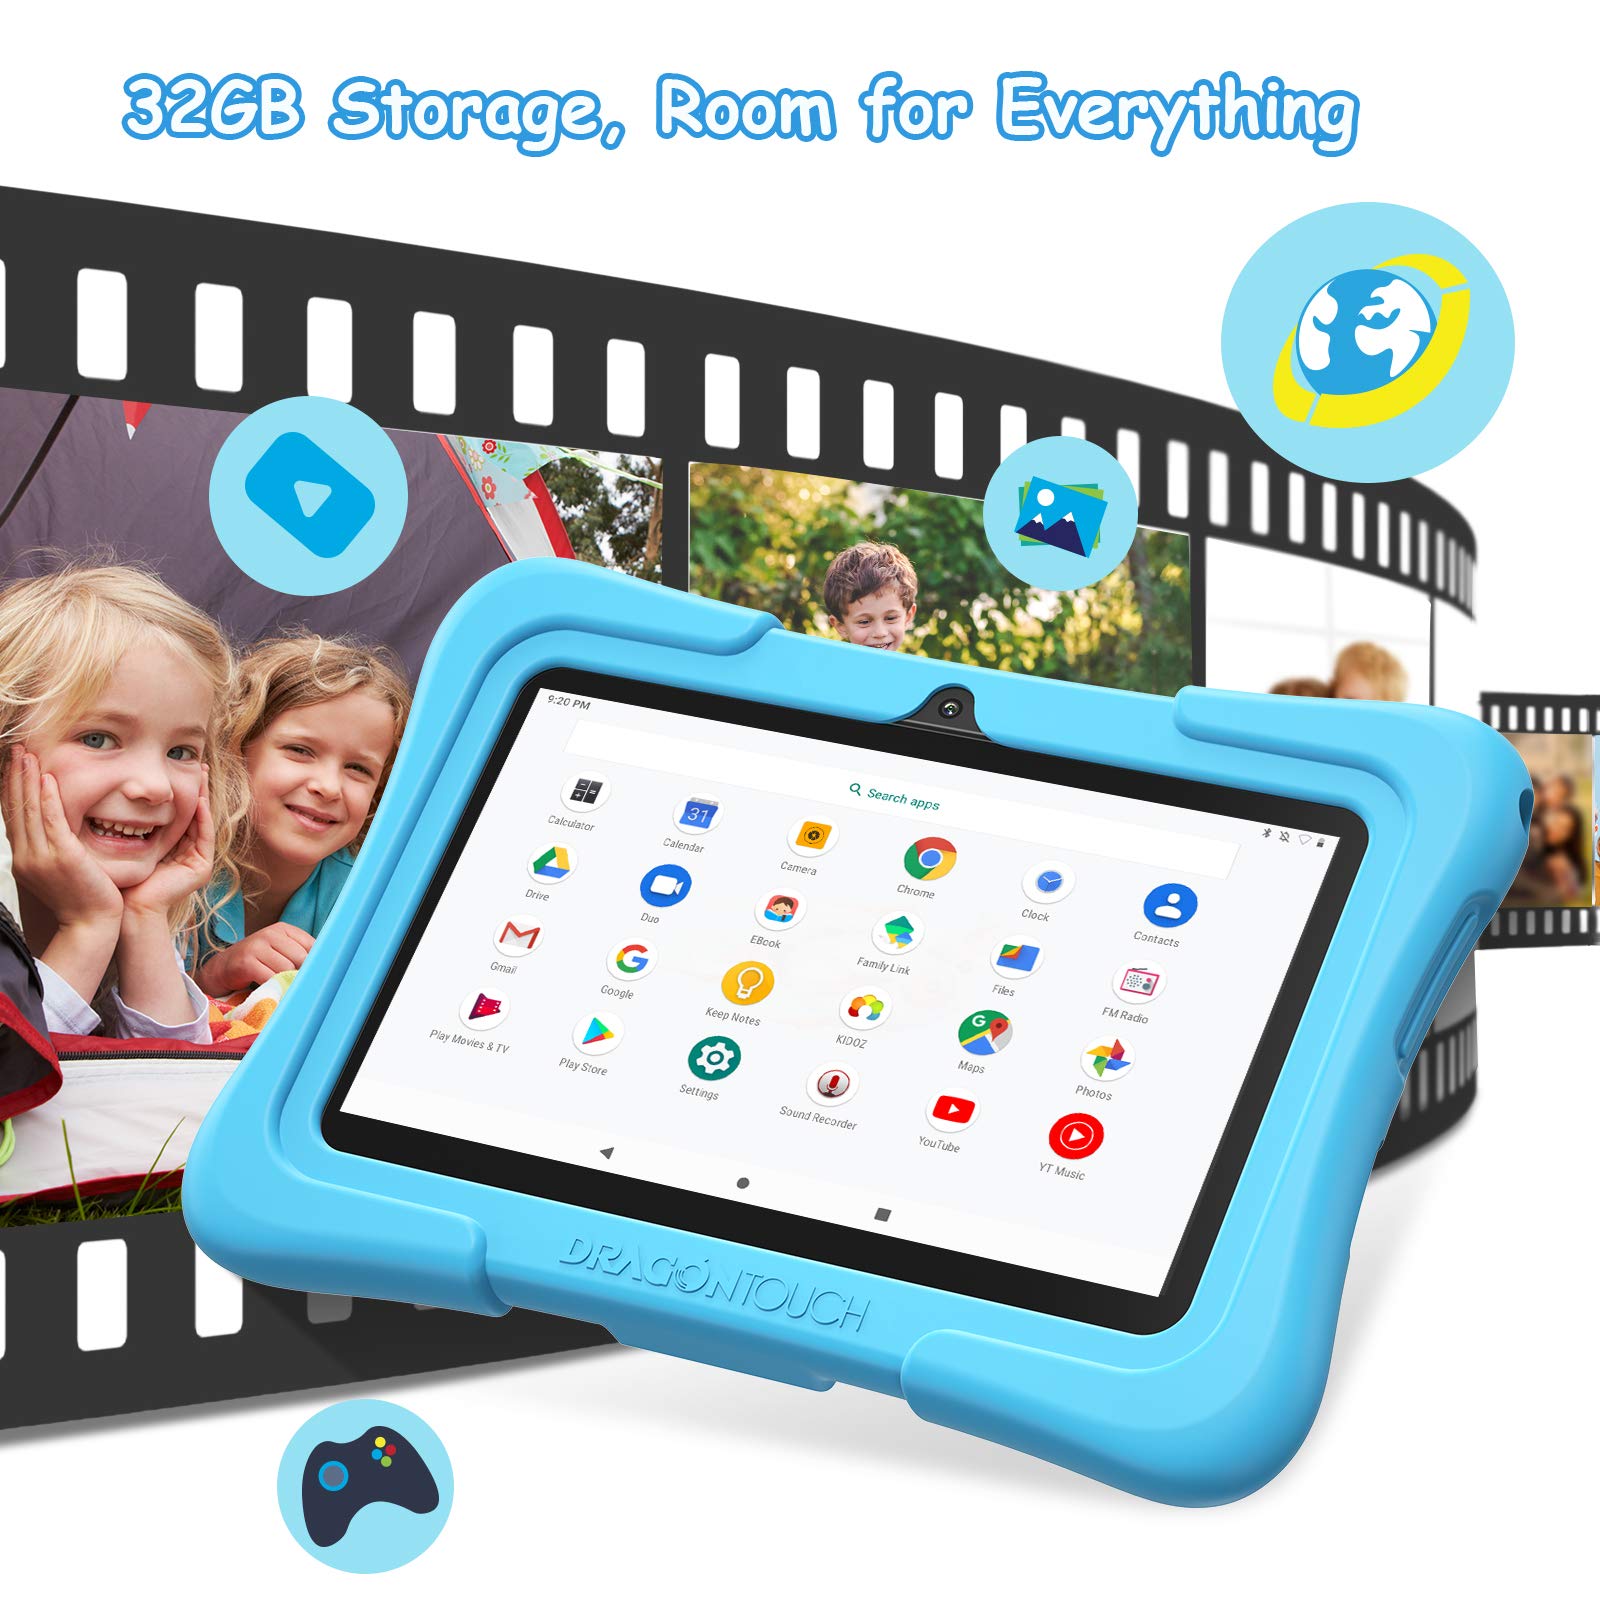 Dragon Touch KidzPad Y88X Kids Tablet with 32GB ROM, 7 inch IPS HD Display, Android 10.0, Quad Core Processor, Kidoz Pre Installed with Kid-Proof Case, Wi-Fi only (Blue)